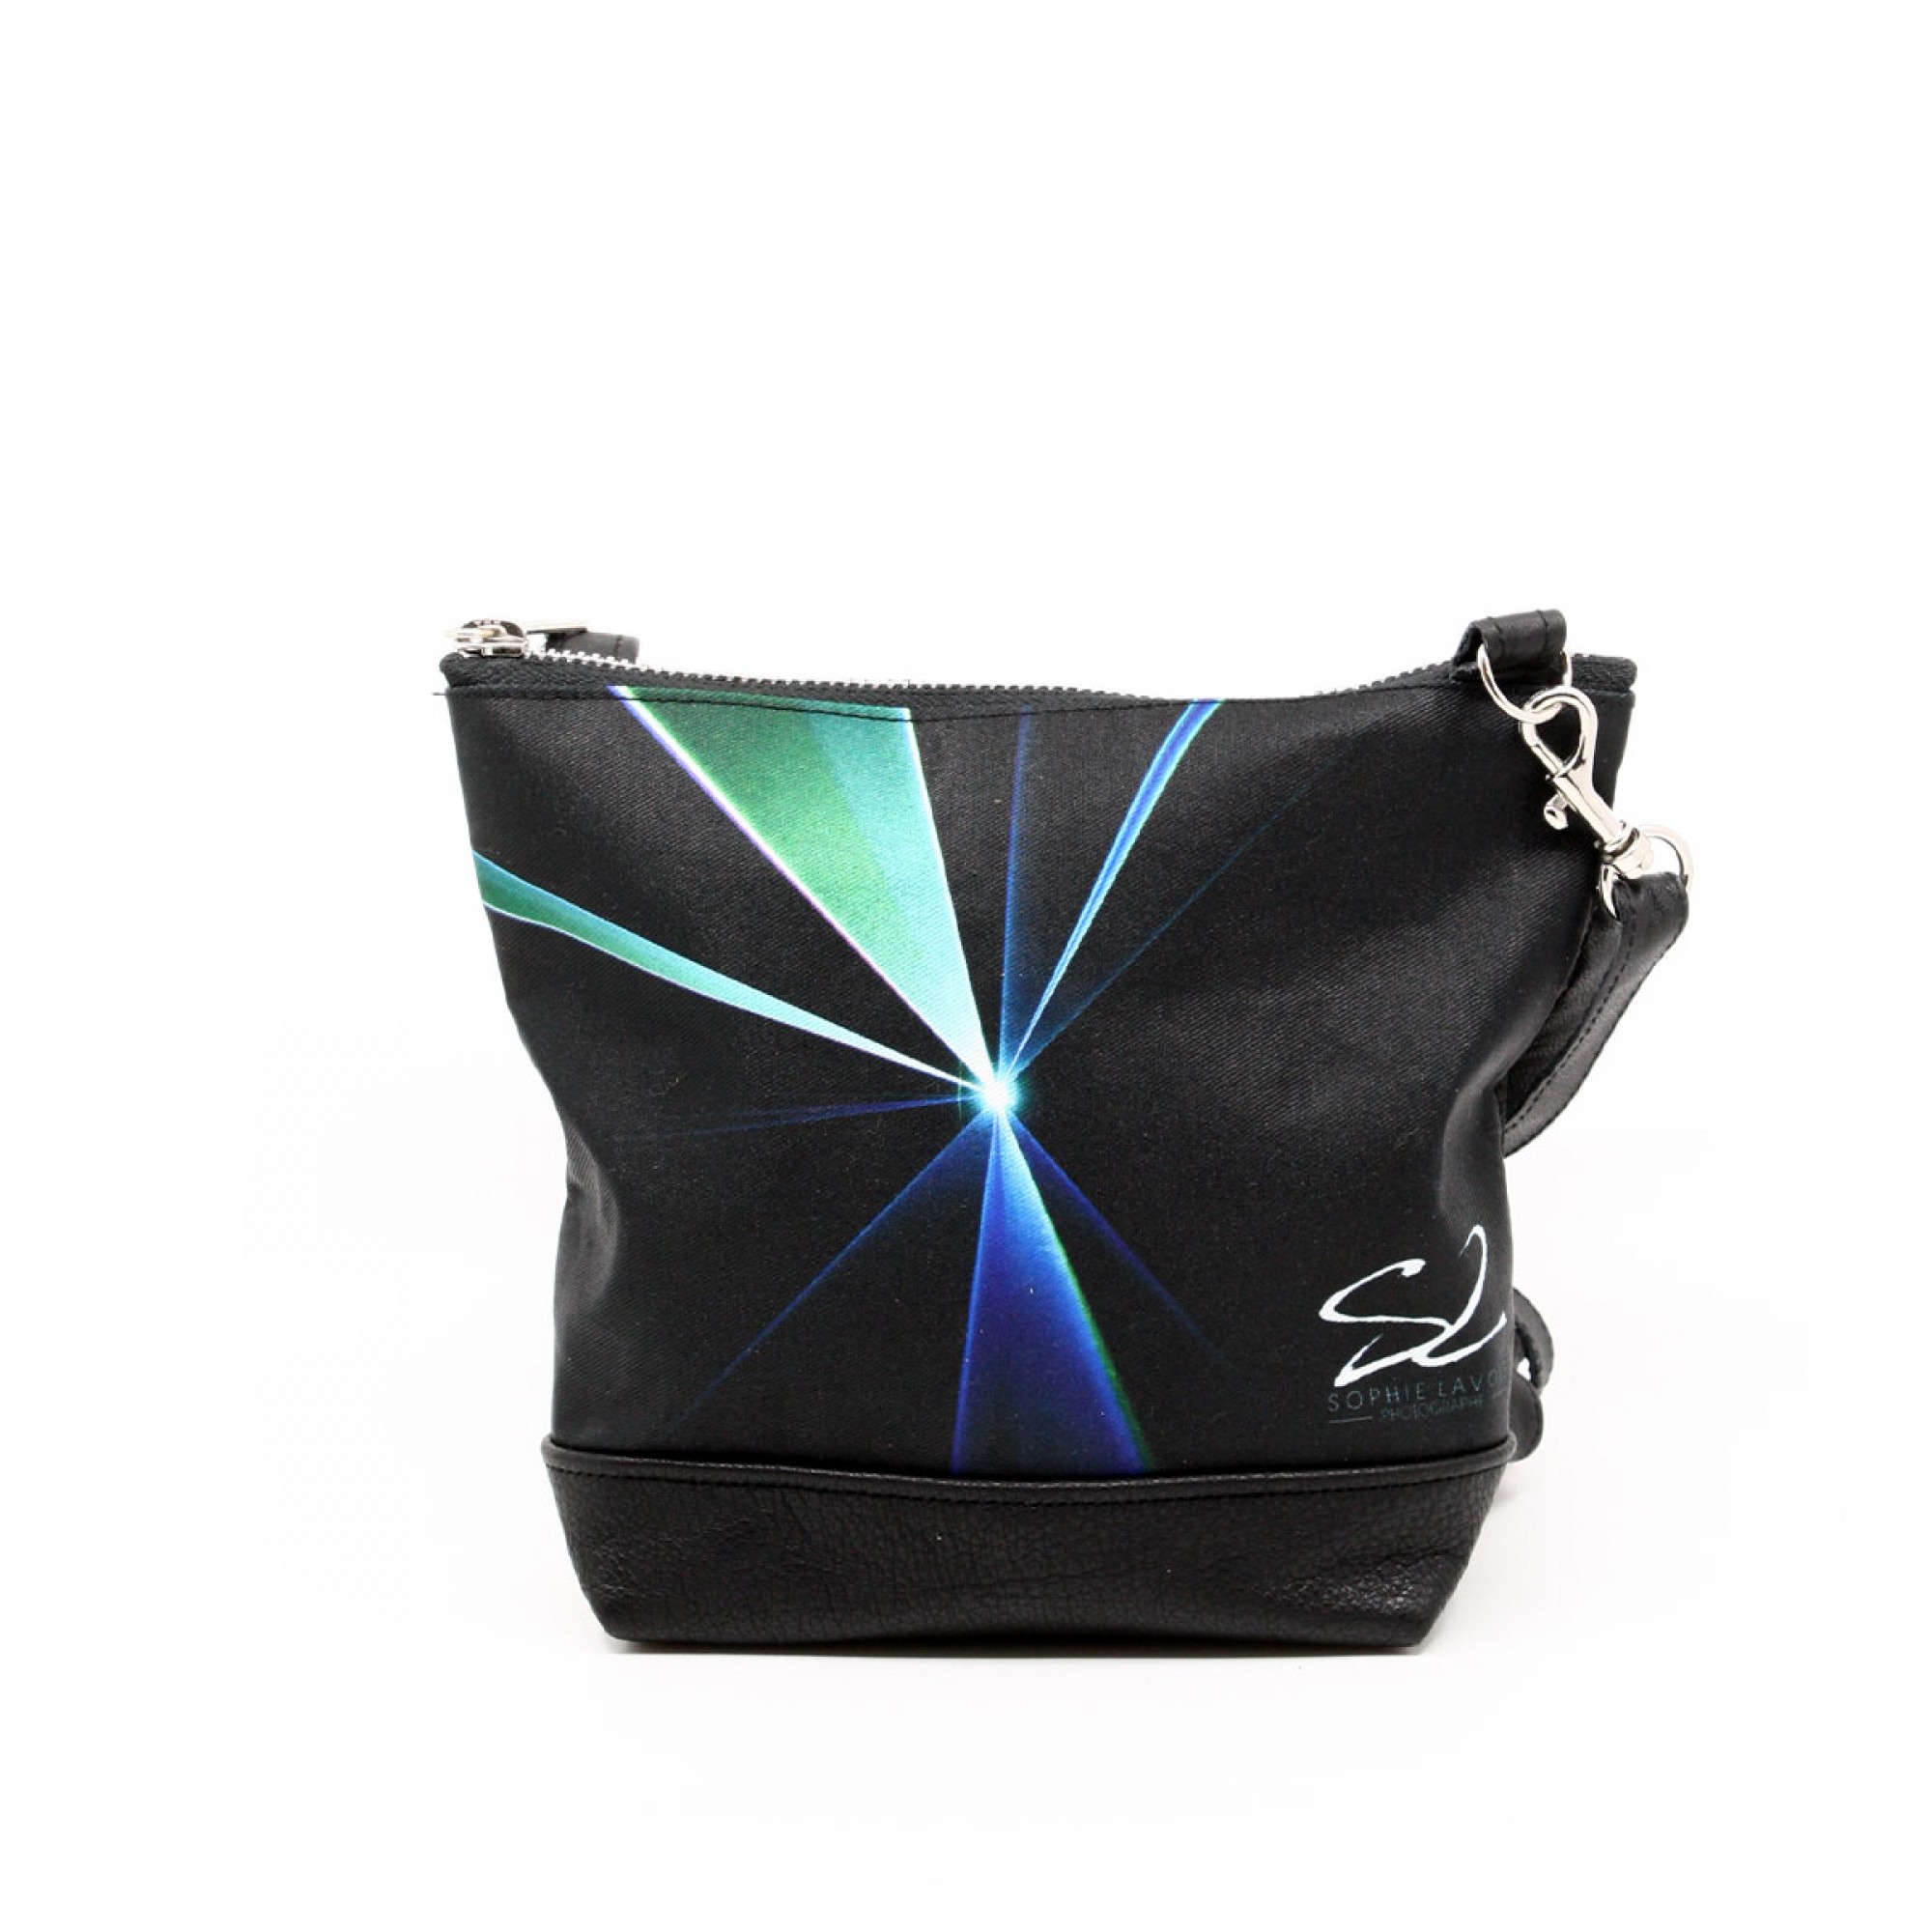 Small shoulder bag featuring a work of Sophie Lavoie Photographer